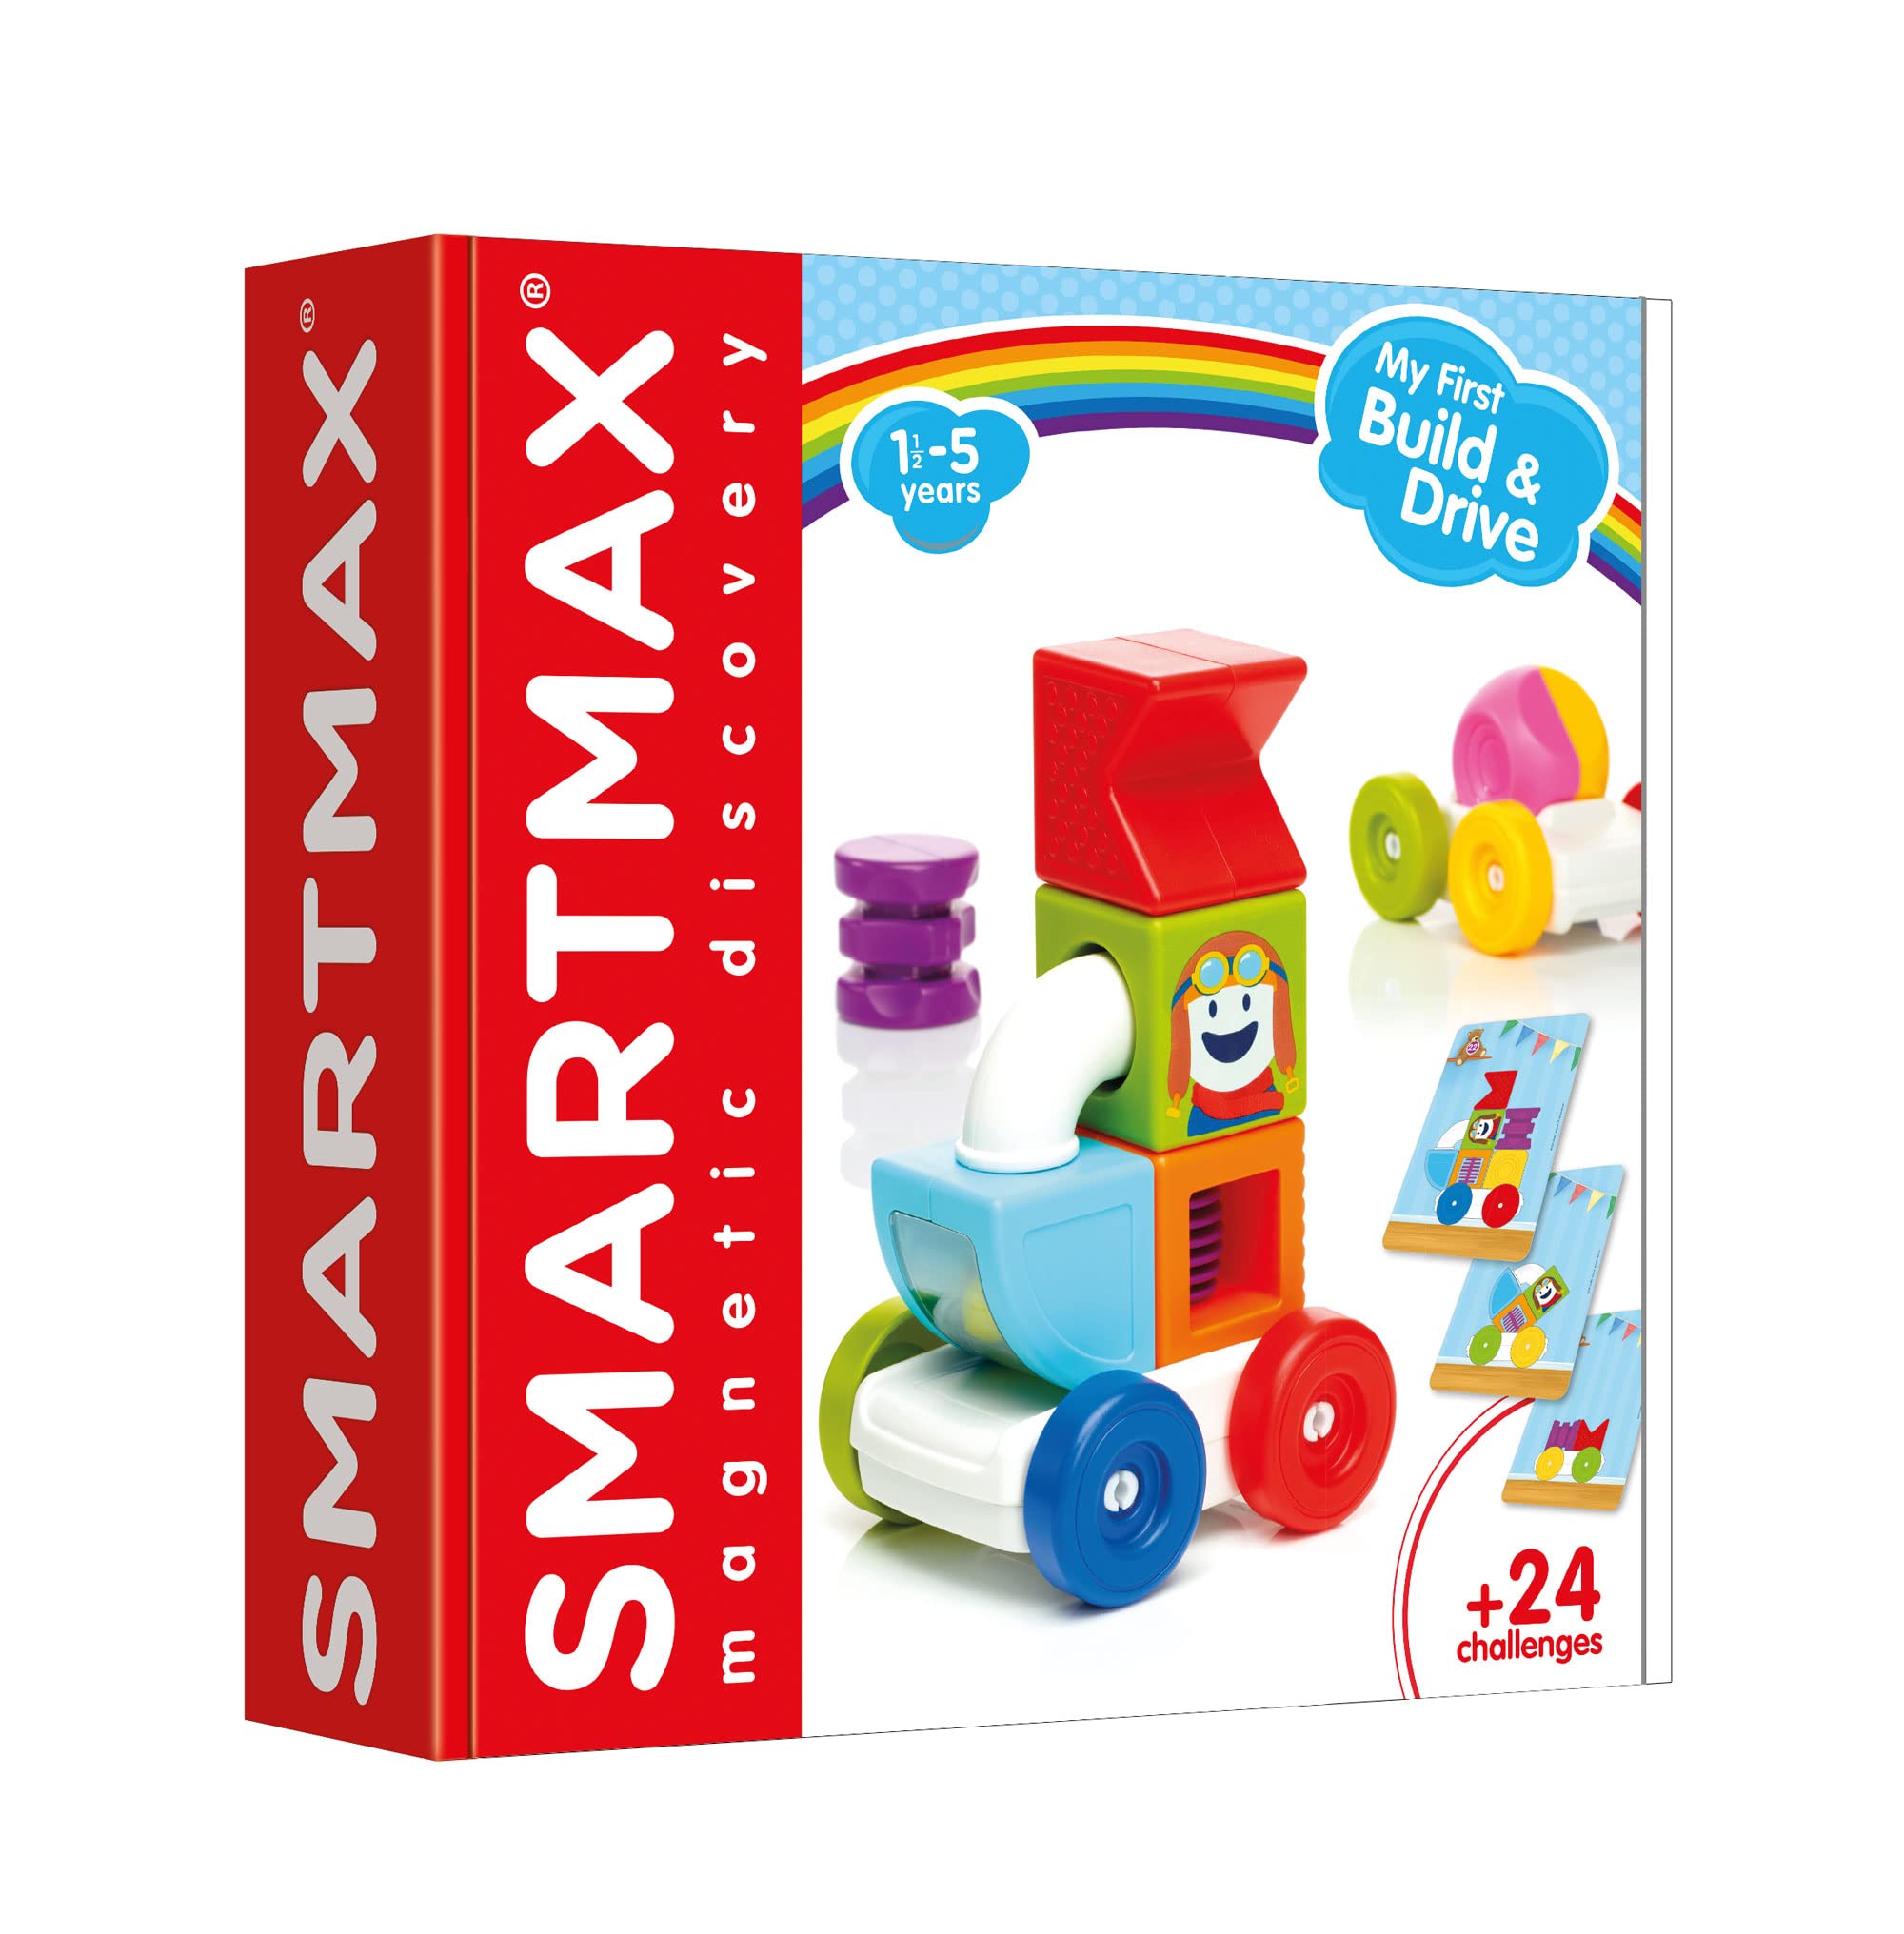 SmartMax My First Build and Drive Magnetic Building Vehicle STEM Play Set for Ages 1-5